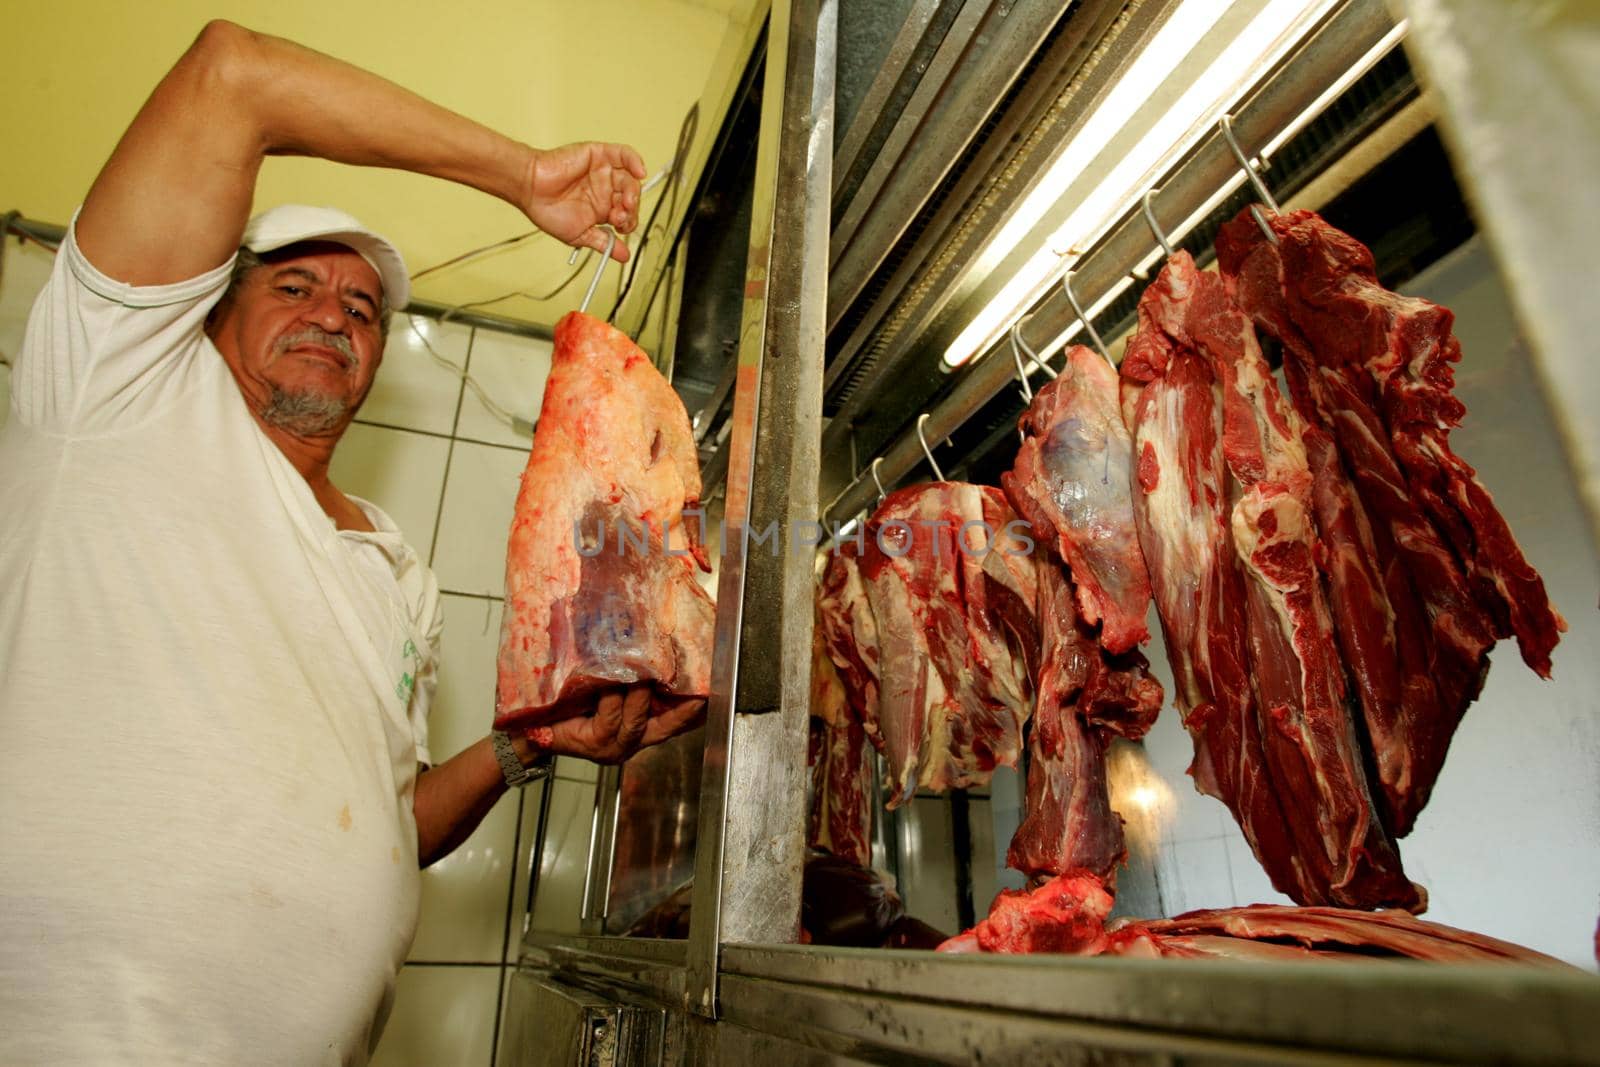 eunapolis, bahia / brazil - october 6, 2009: a butcher is seen holding a piece of bolvina meat on a market in the city of Eunapolis, in southern Bahia.